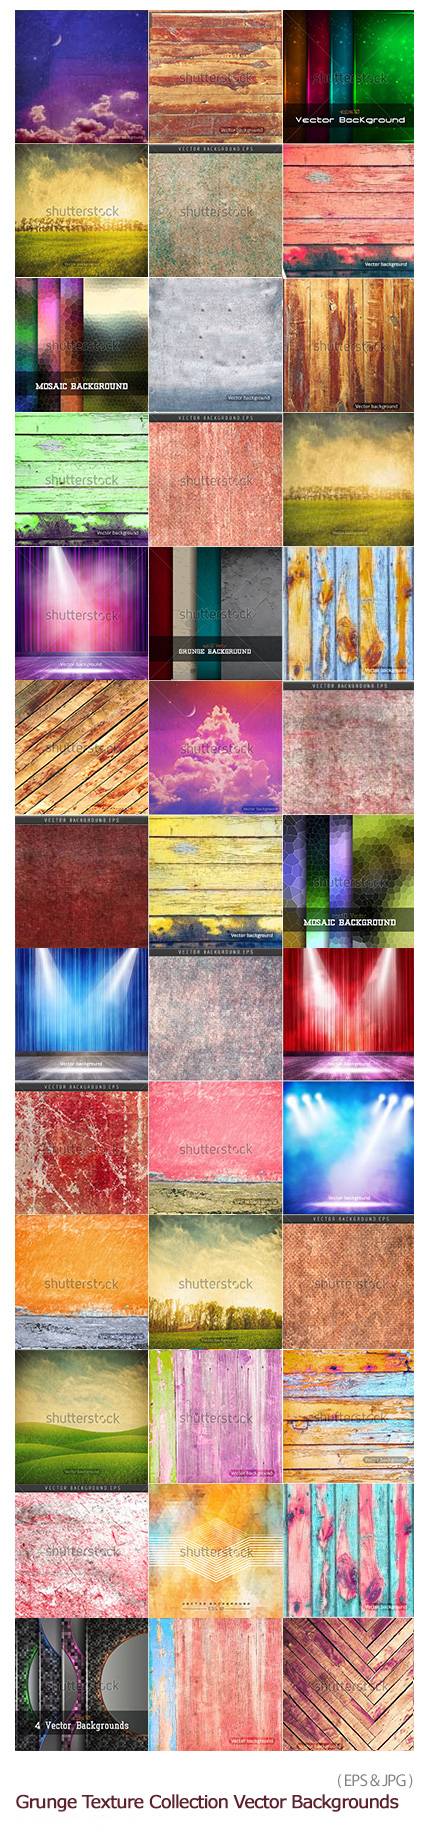 Grunge Texture Collection Vector Backgrounds